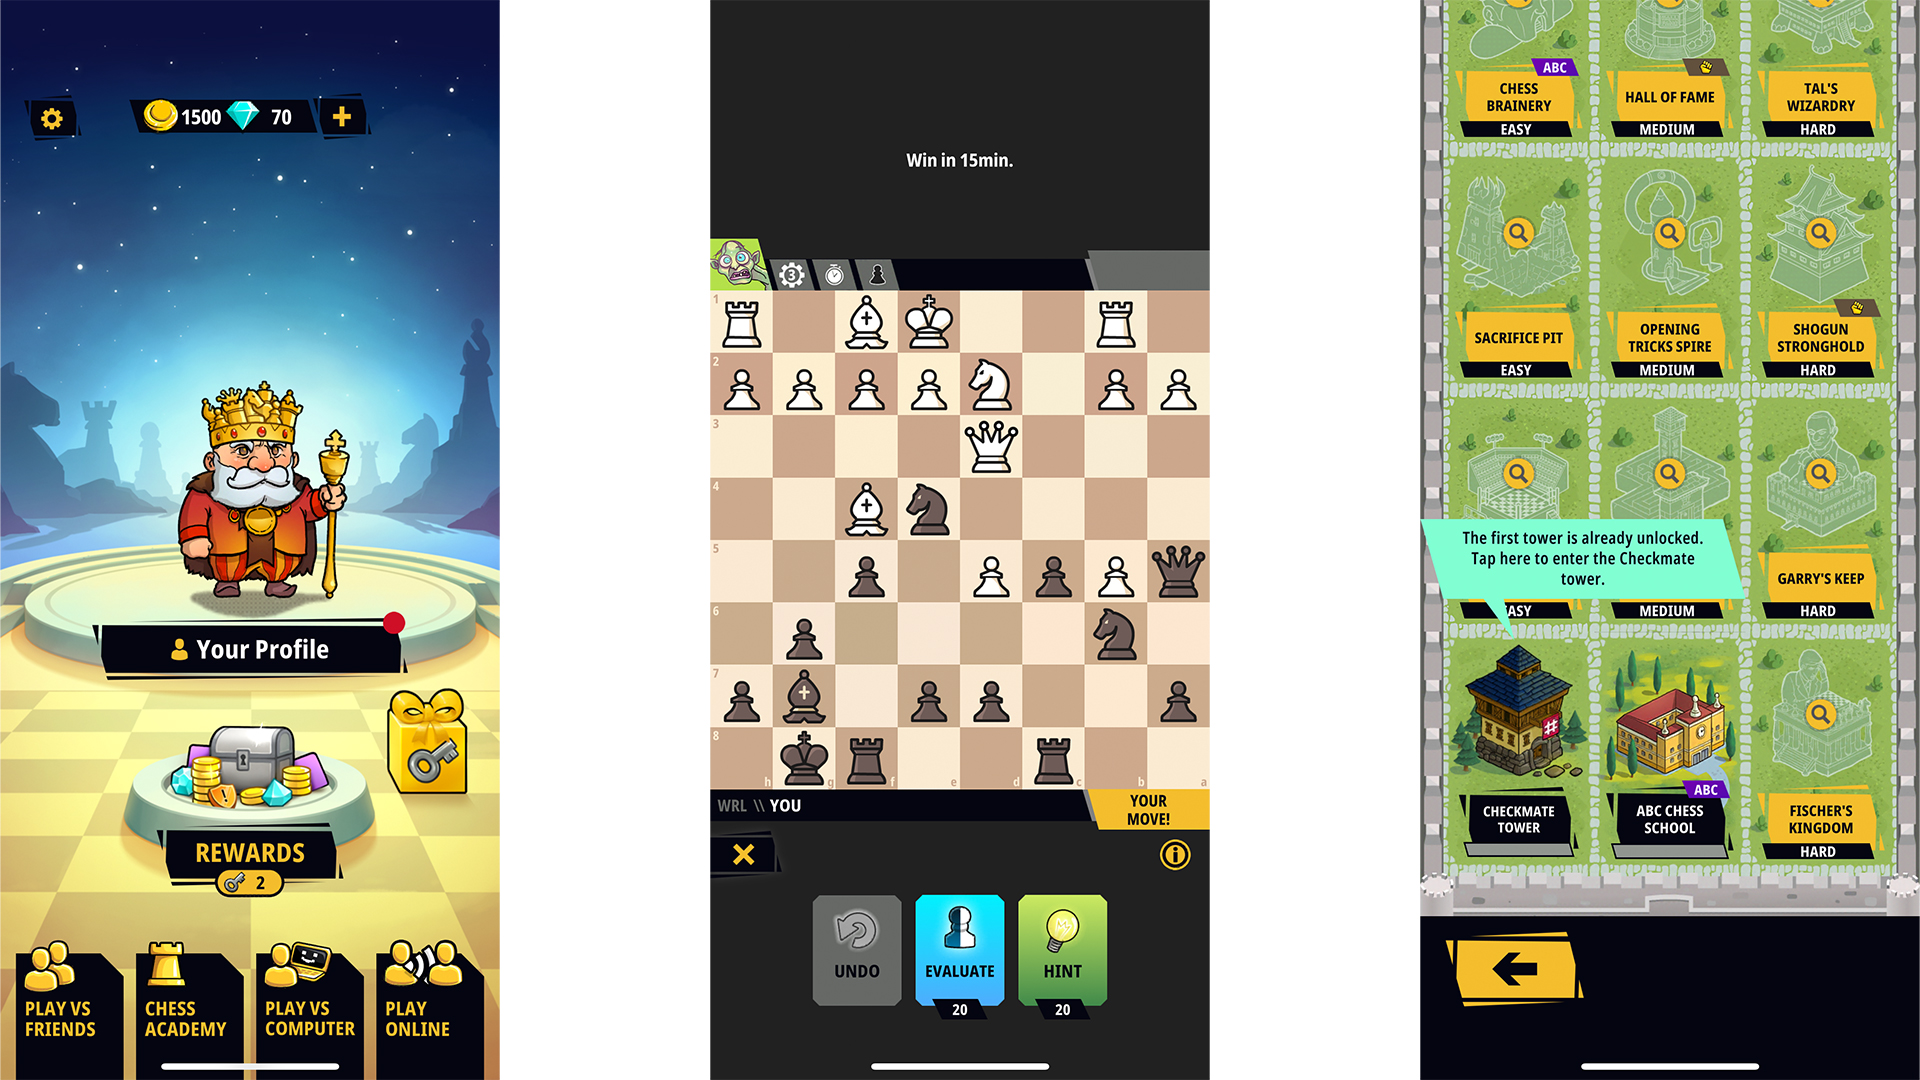 Free Easter Island DLC arrives for Chess Ultra